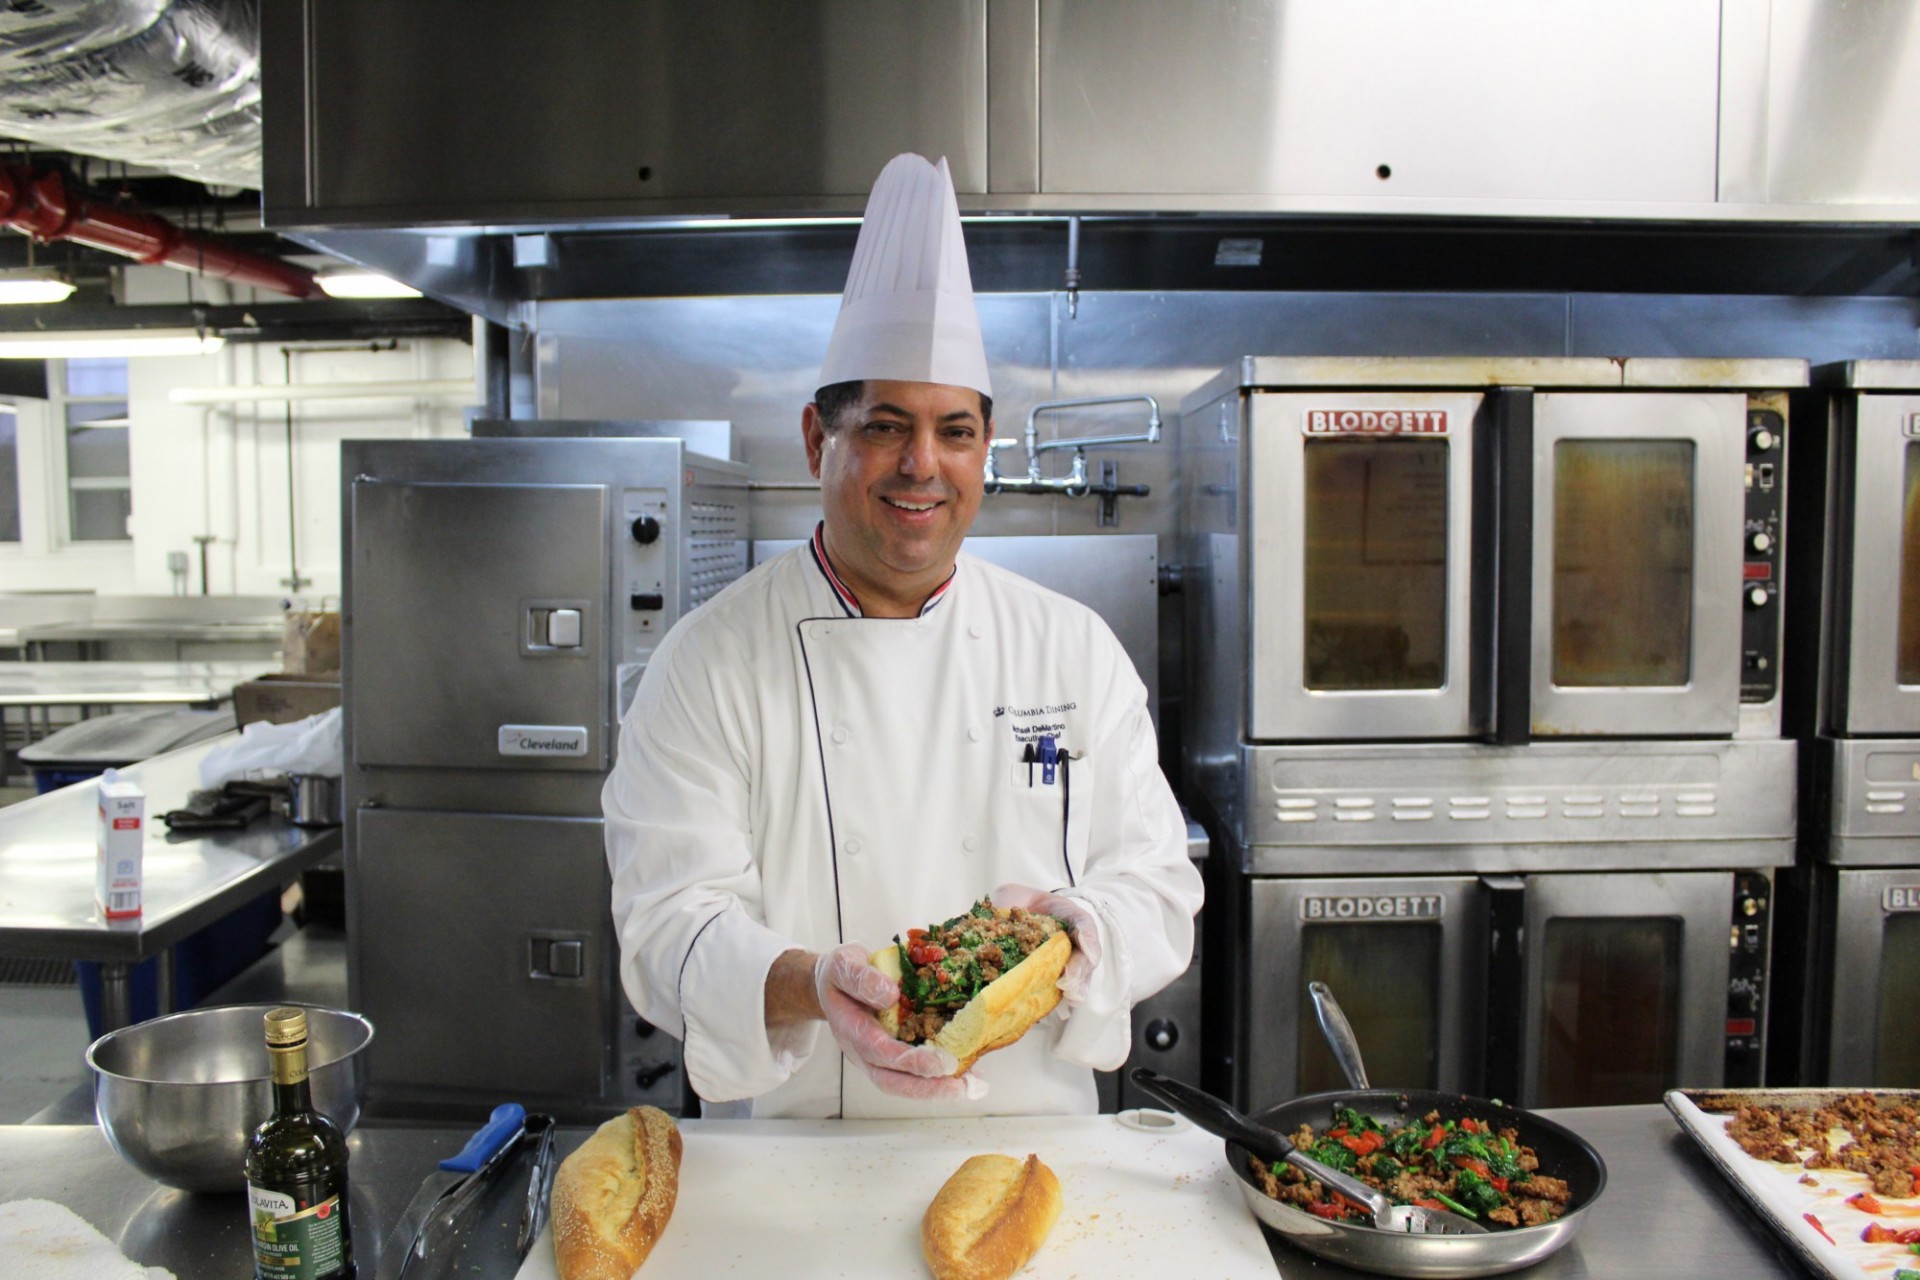 Chef Mike is in a kitchen, holding up the Grandma sub that he just prepared.